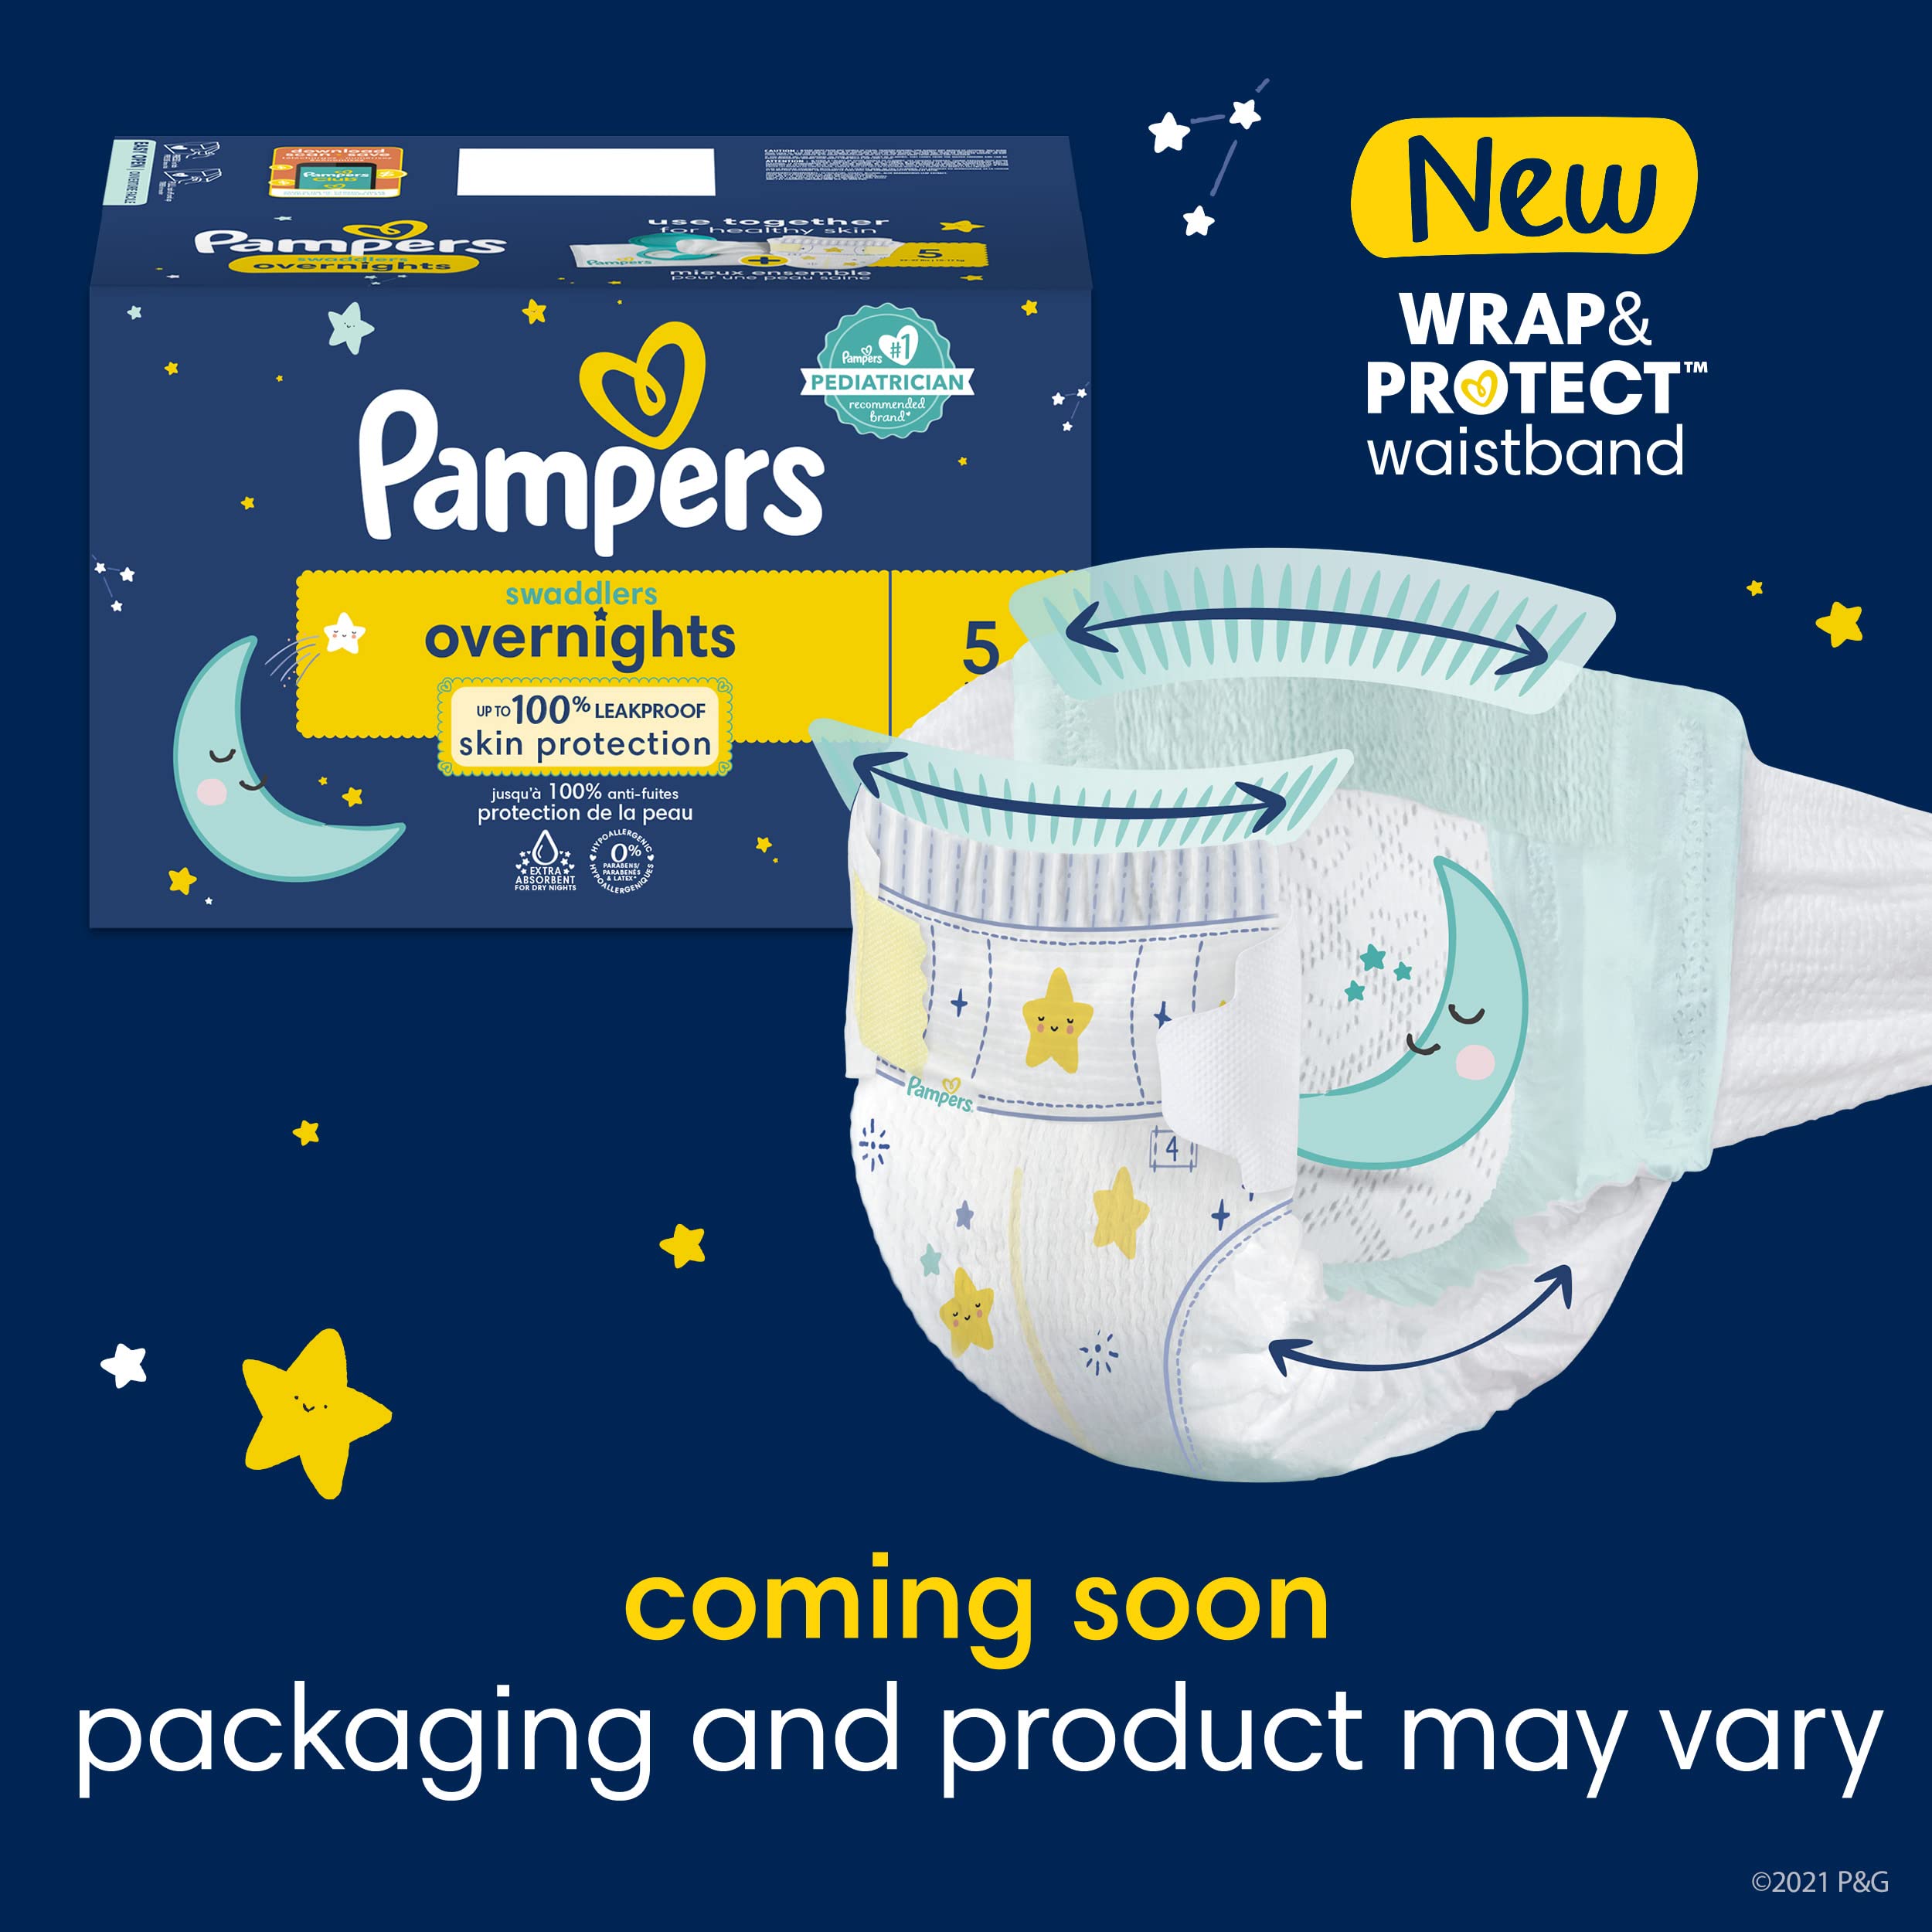 Diapers Size 6, 42 Count - Pampers Swaddlers Overnights Disposable Baby Diapers, Super Pack (Packaging & Prints May Vary)